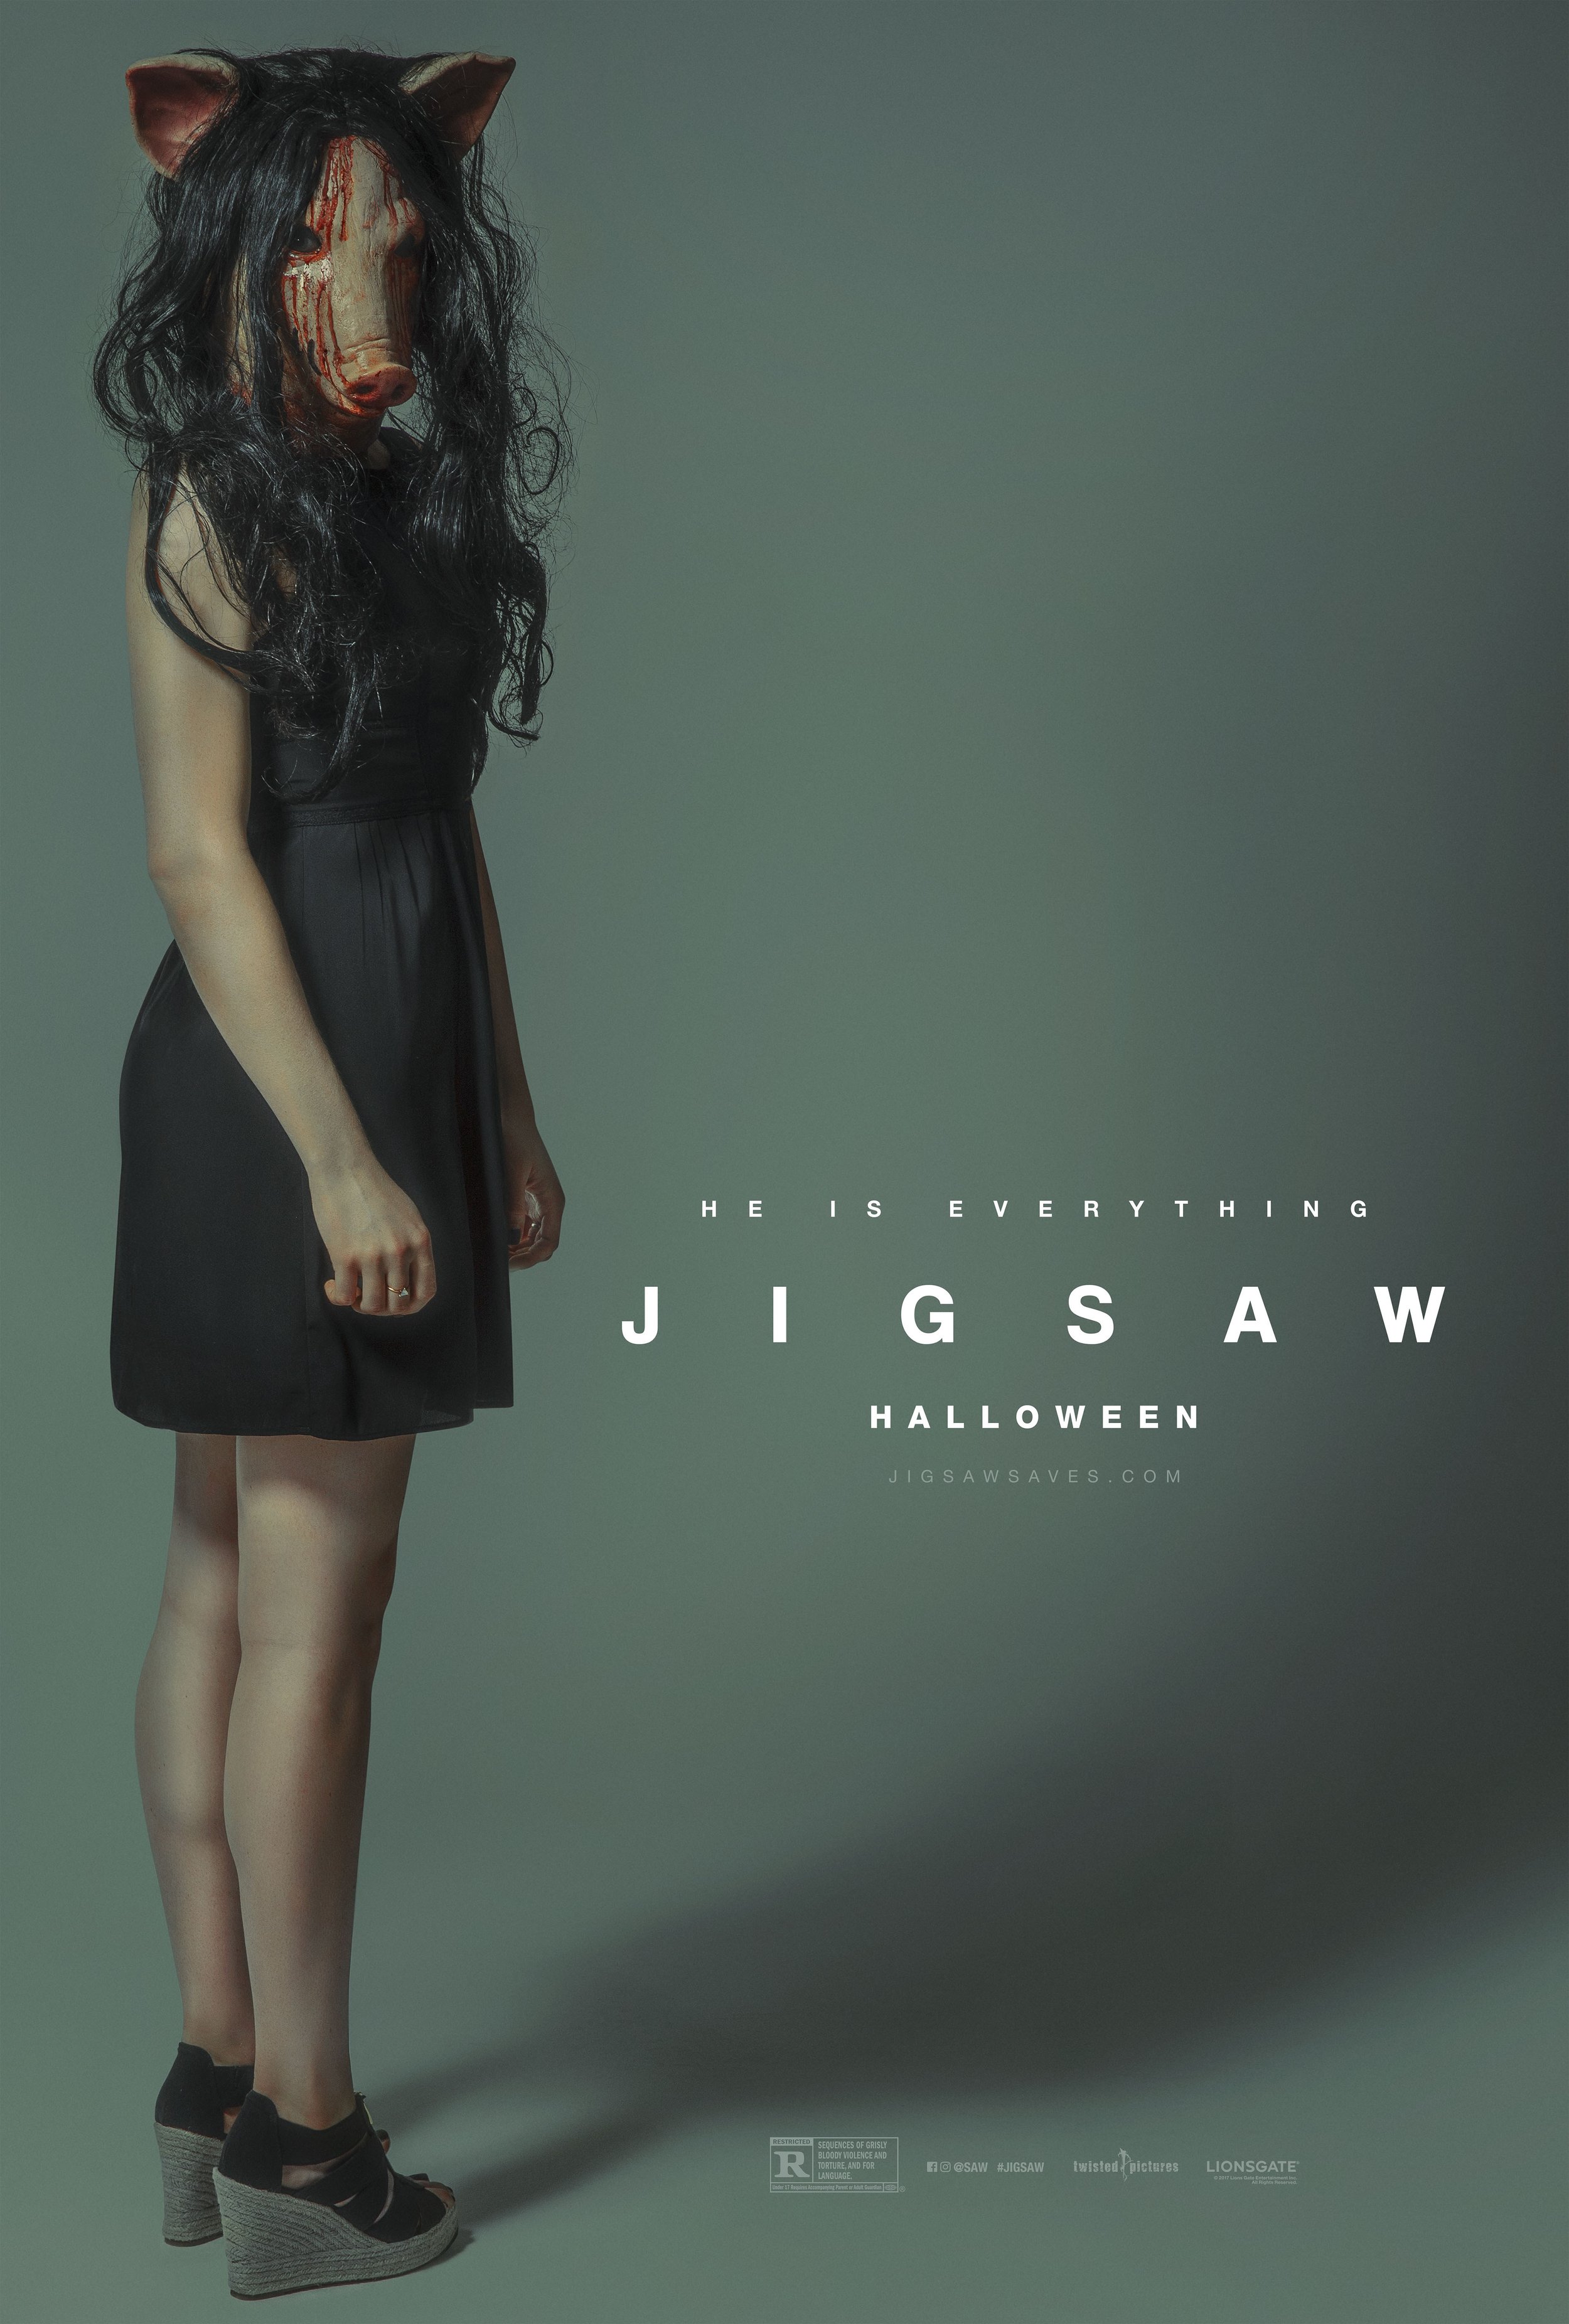 Jigsaw: He is Everything